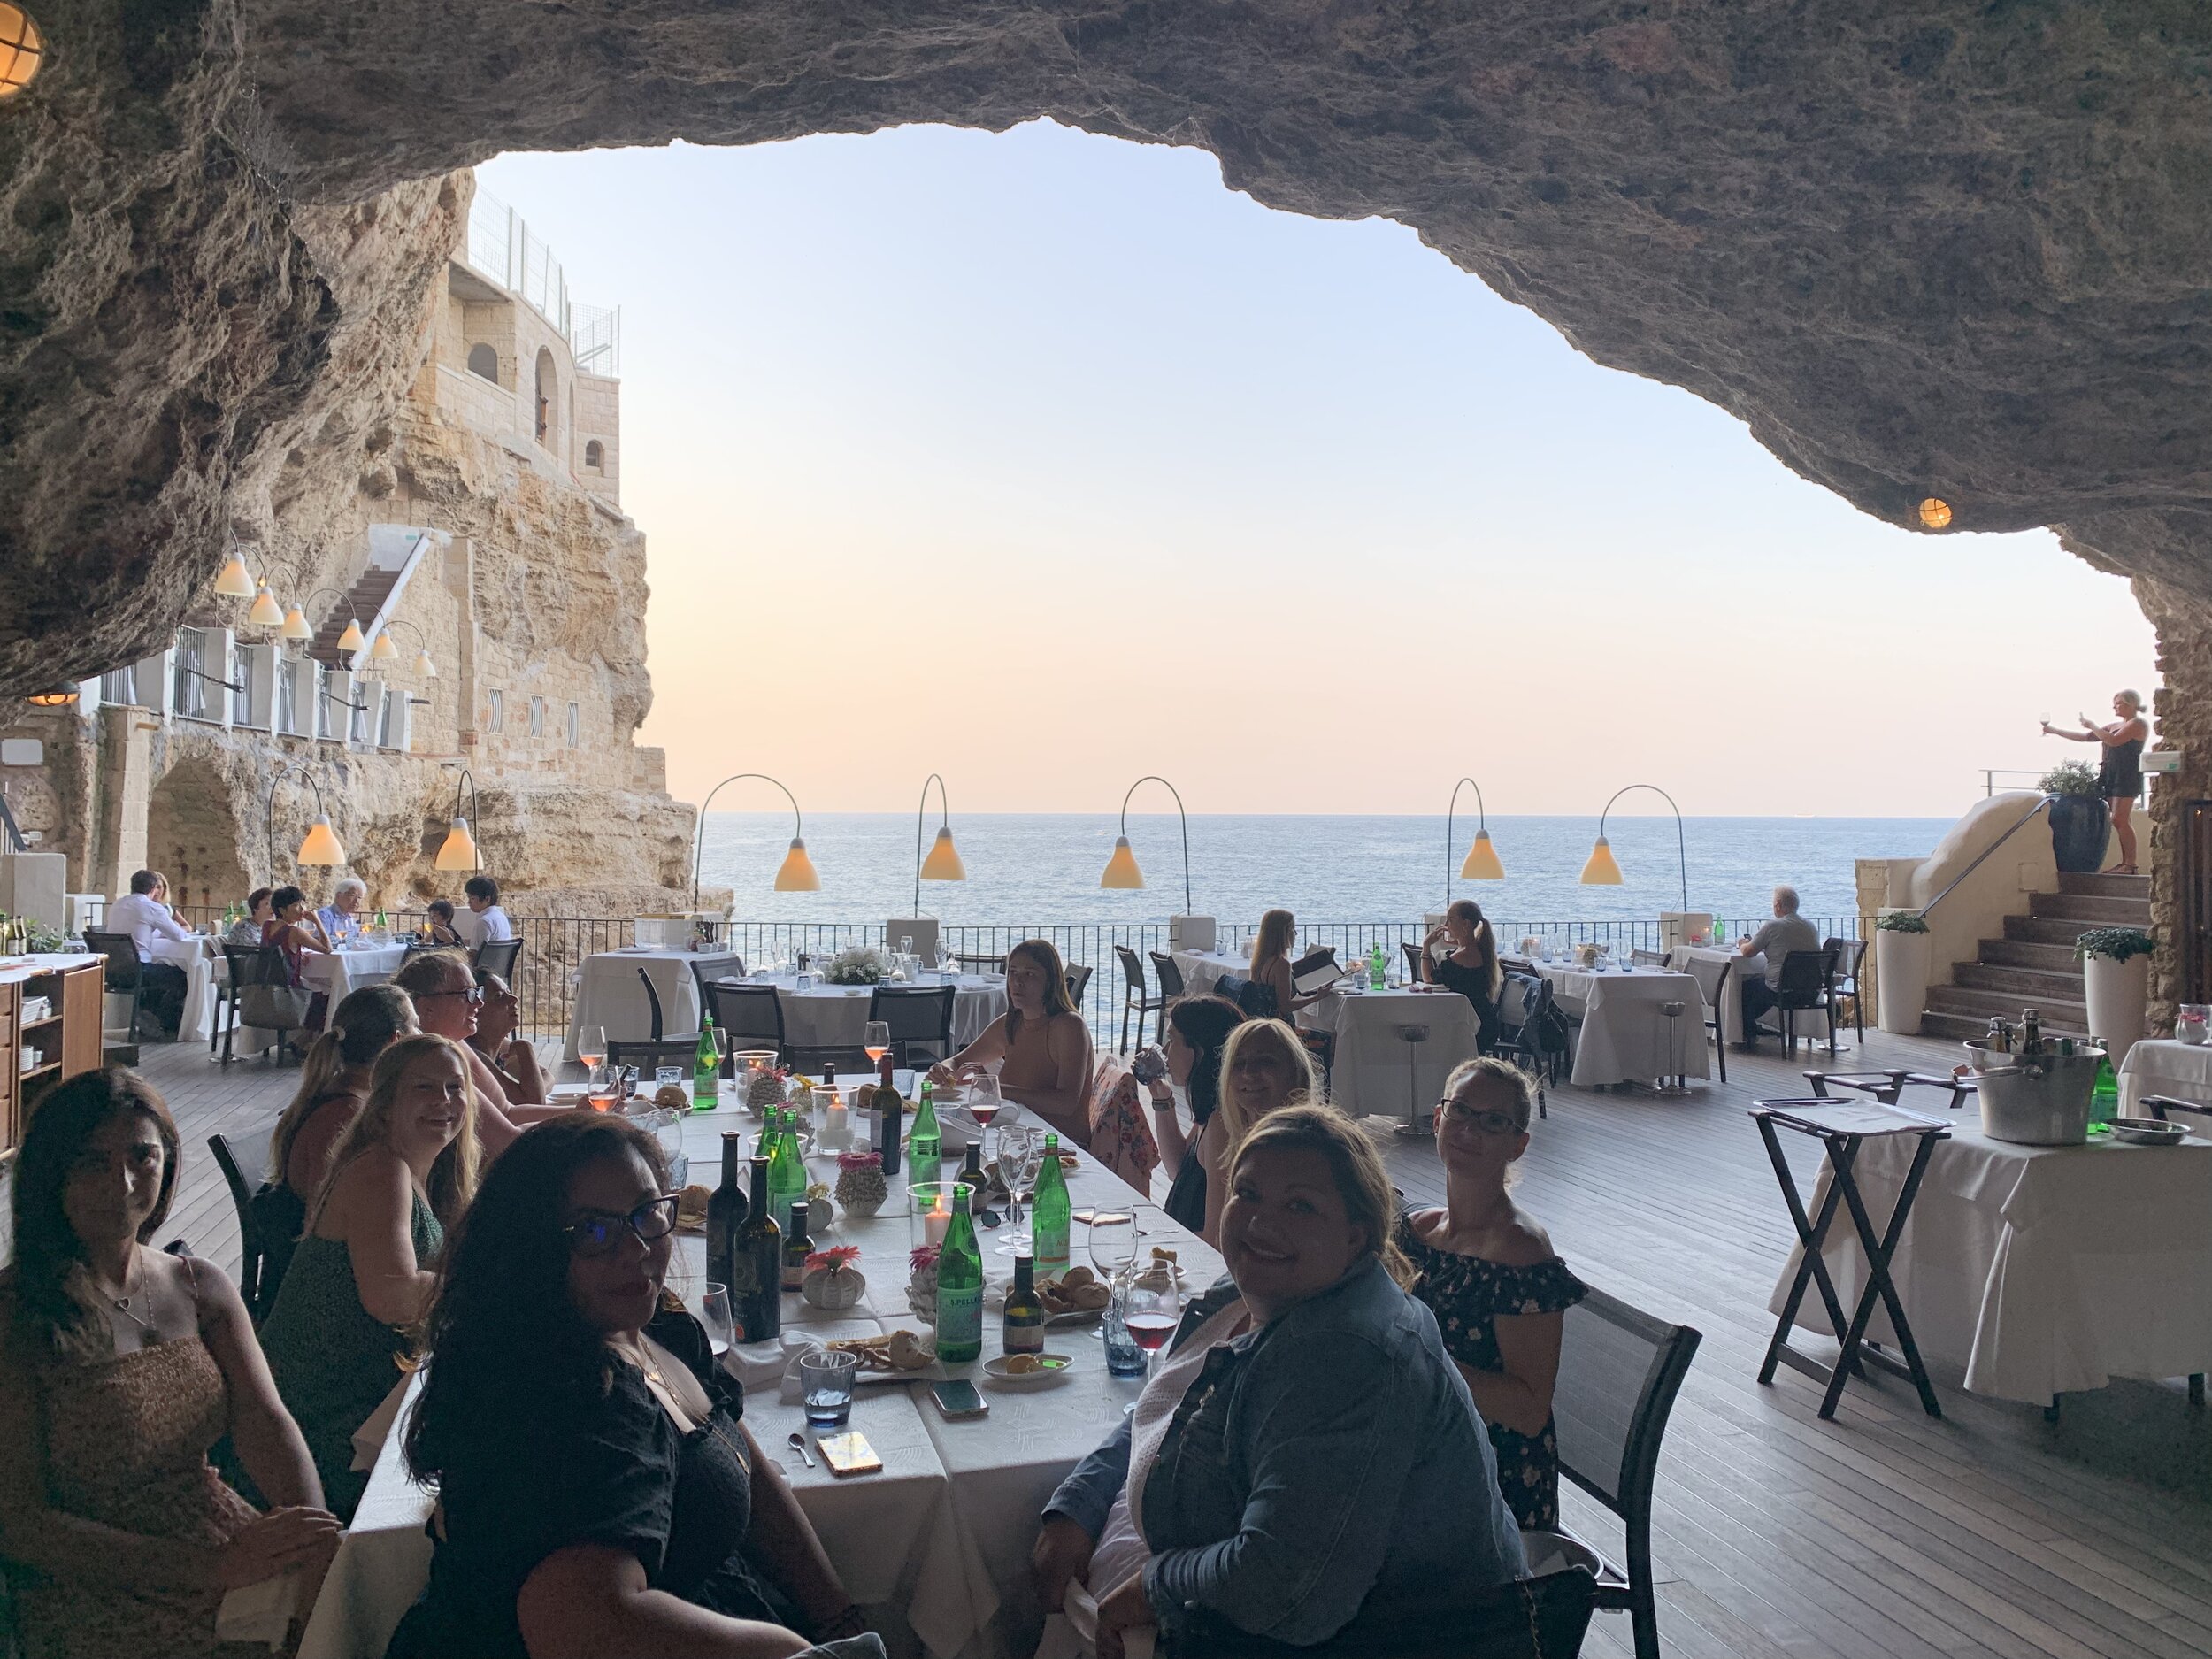 Guests dining in a grotto restaurant | EAT.PRAY.MOVE Yoga Retreats | Puglia, Italy